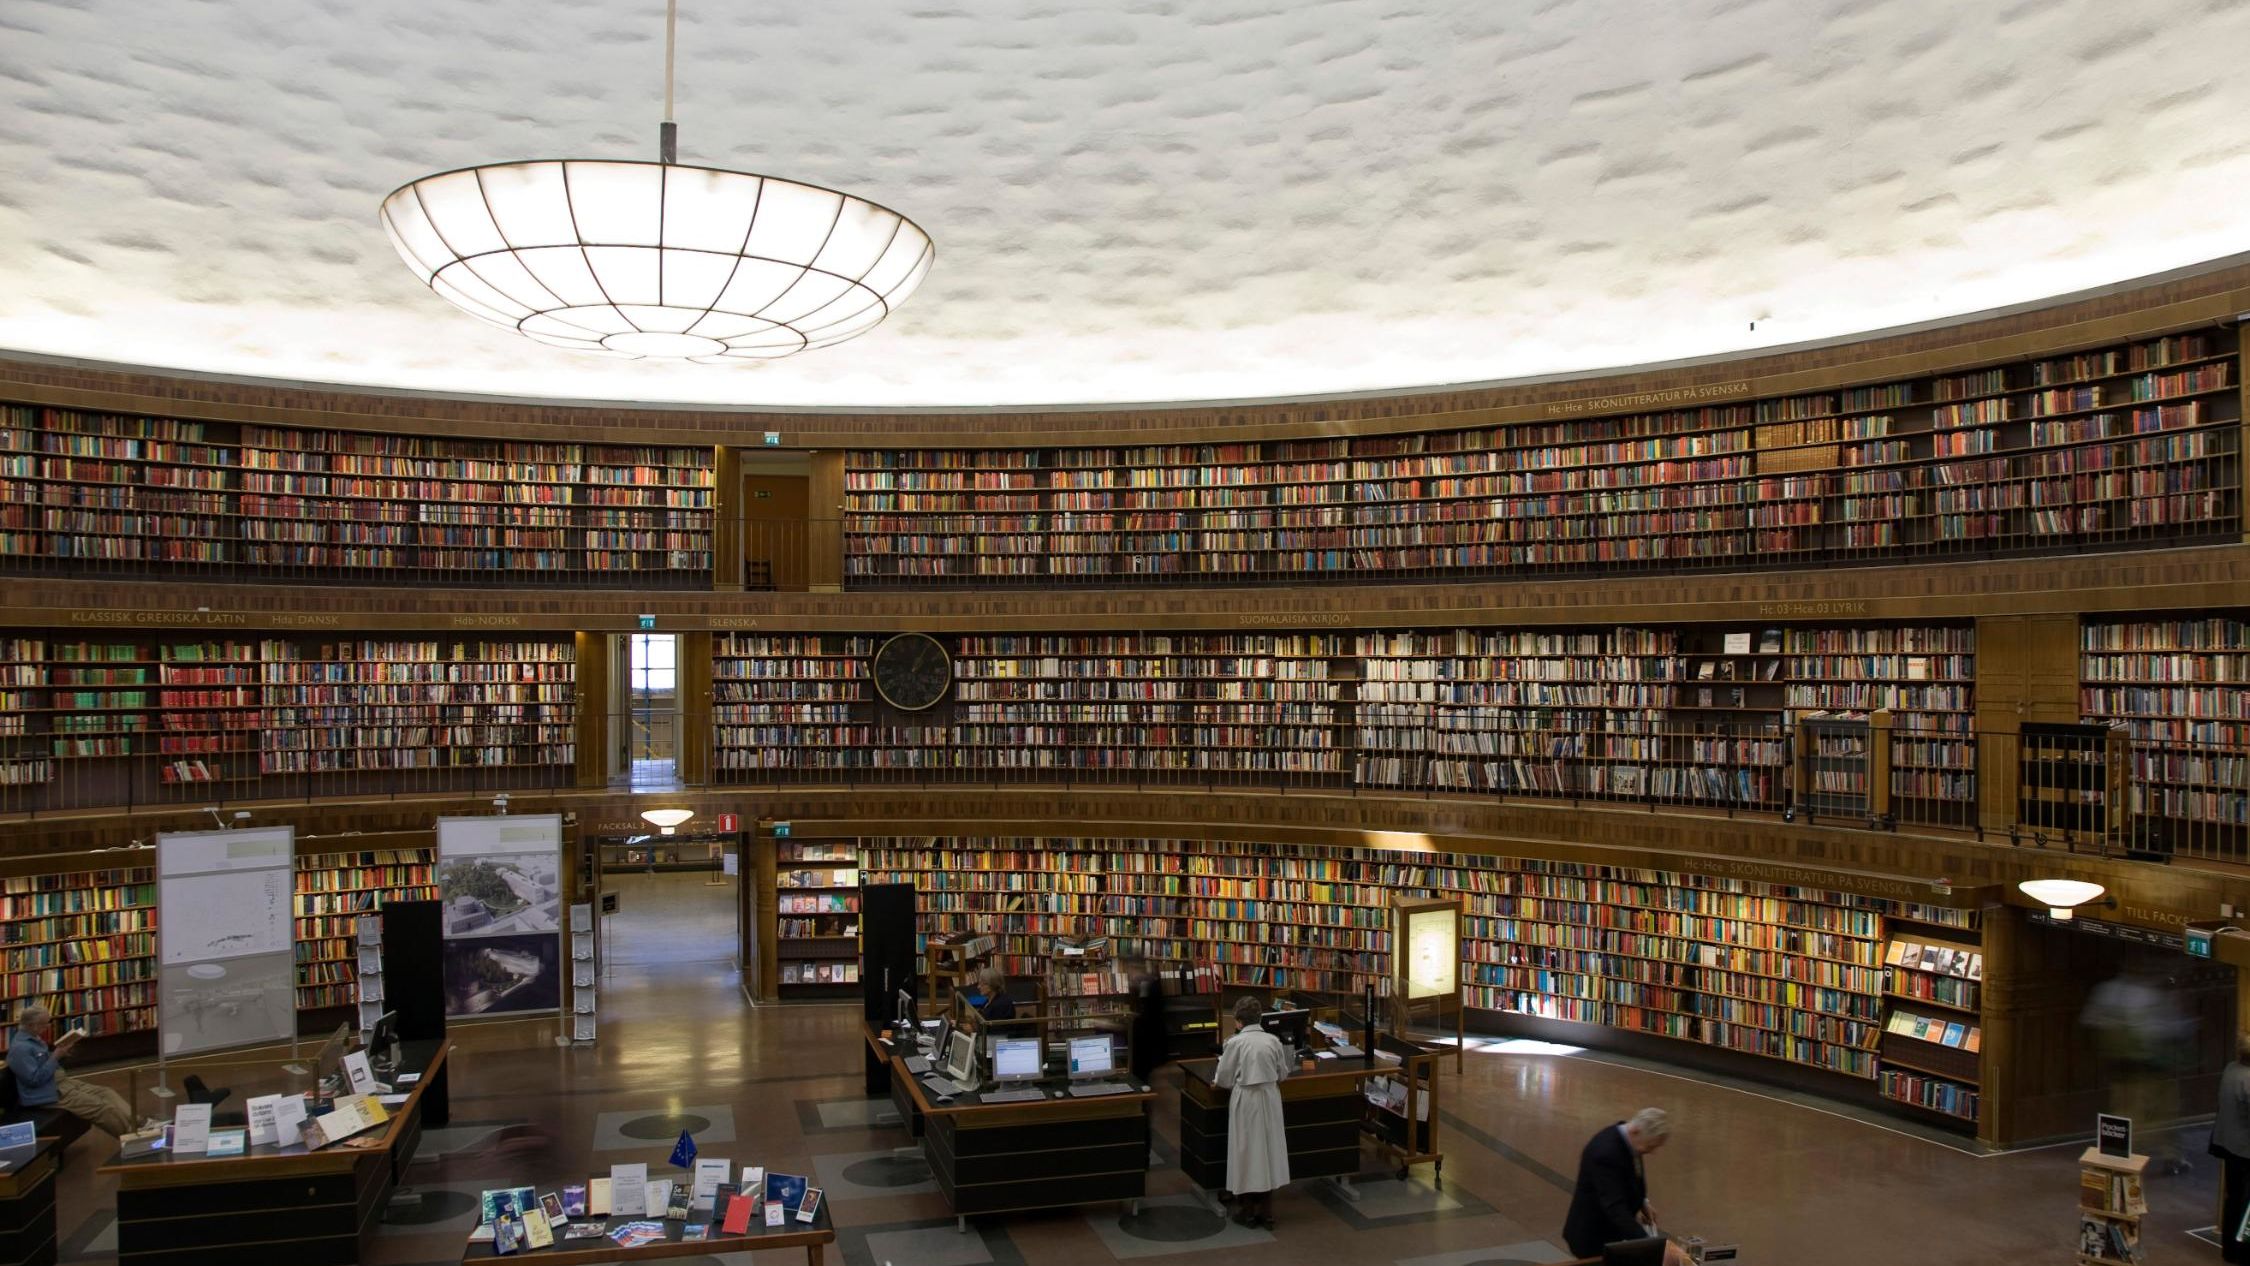 The winner of the New Academy prize will be announced on Friday in the State Library in Stockholm. 